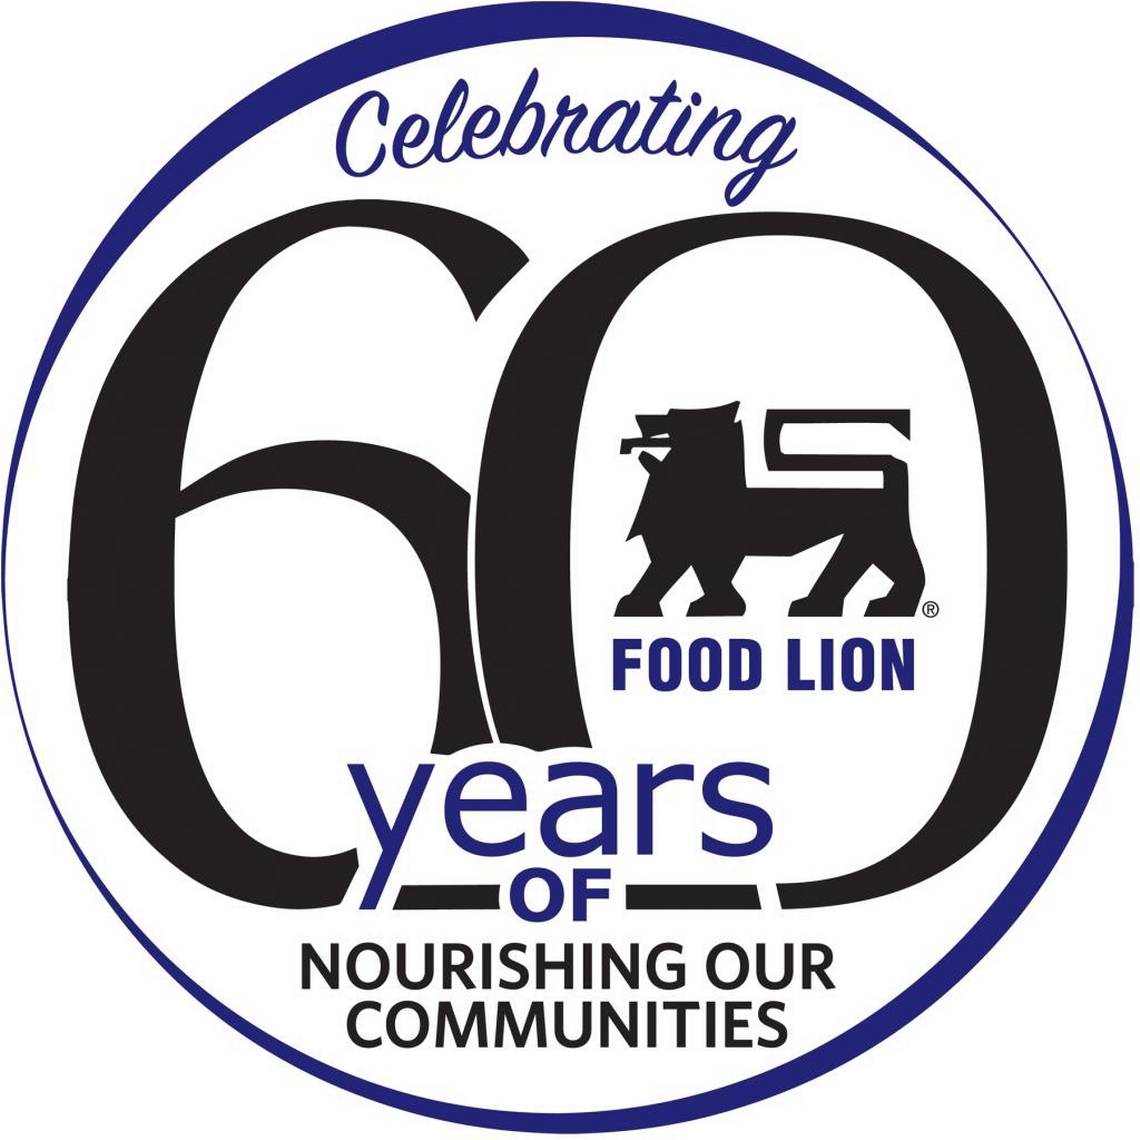 Food Lion Logo - Food Lion celebrates 60th anniversary with discounts, trivia ...